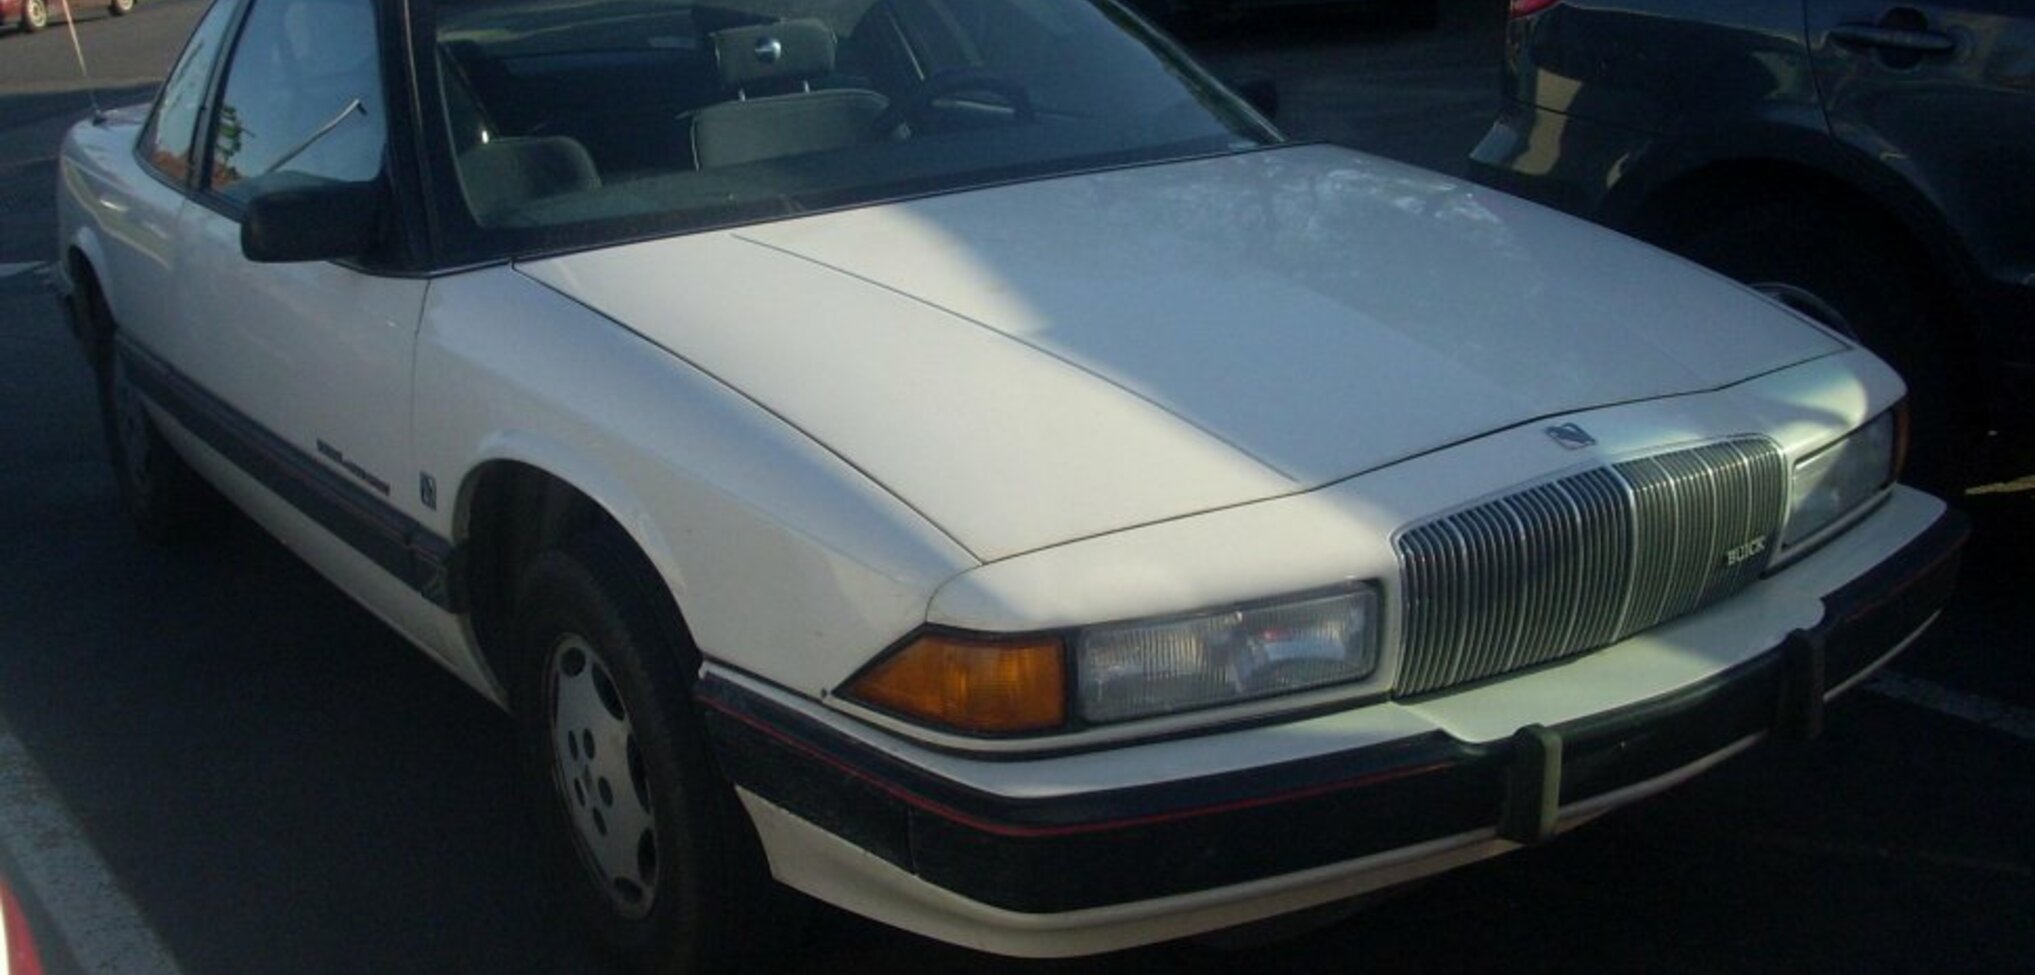 Buick Regal III Coupe 3.8 V6 (208 Hp) Automatic 1988, 1989, 1990, 1991, 1992, 1993, 1994, 1995, 1996 